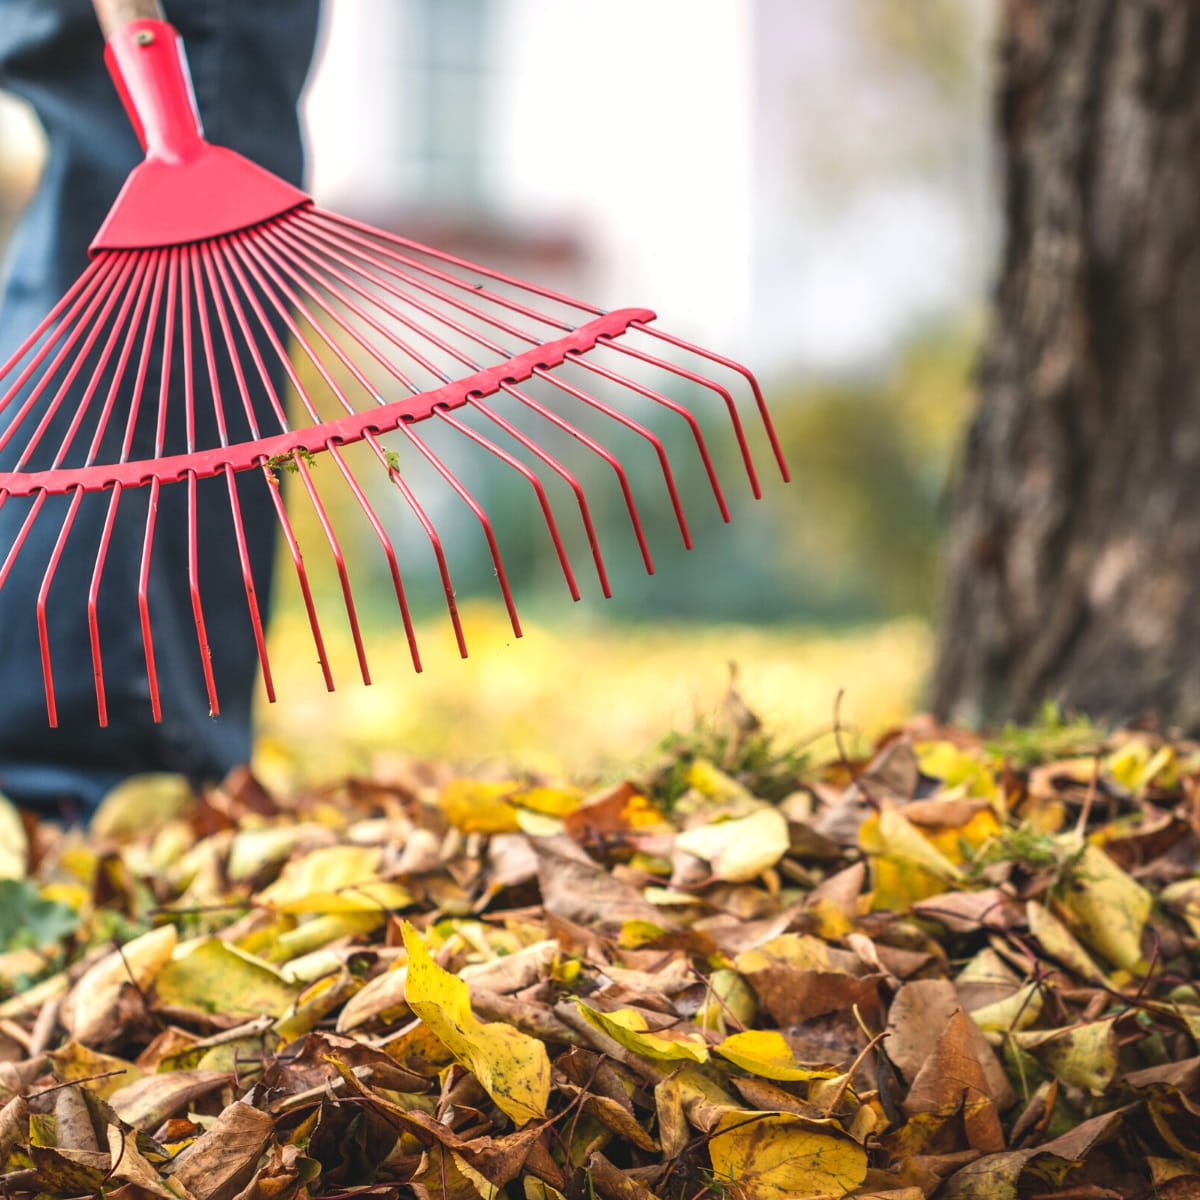 How to Rake Leaves (10 Practical Tips)